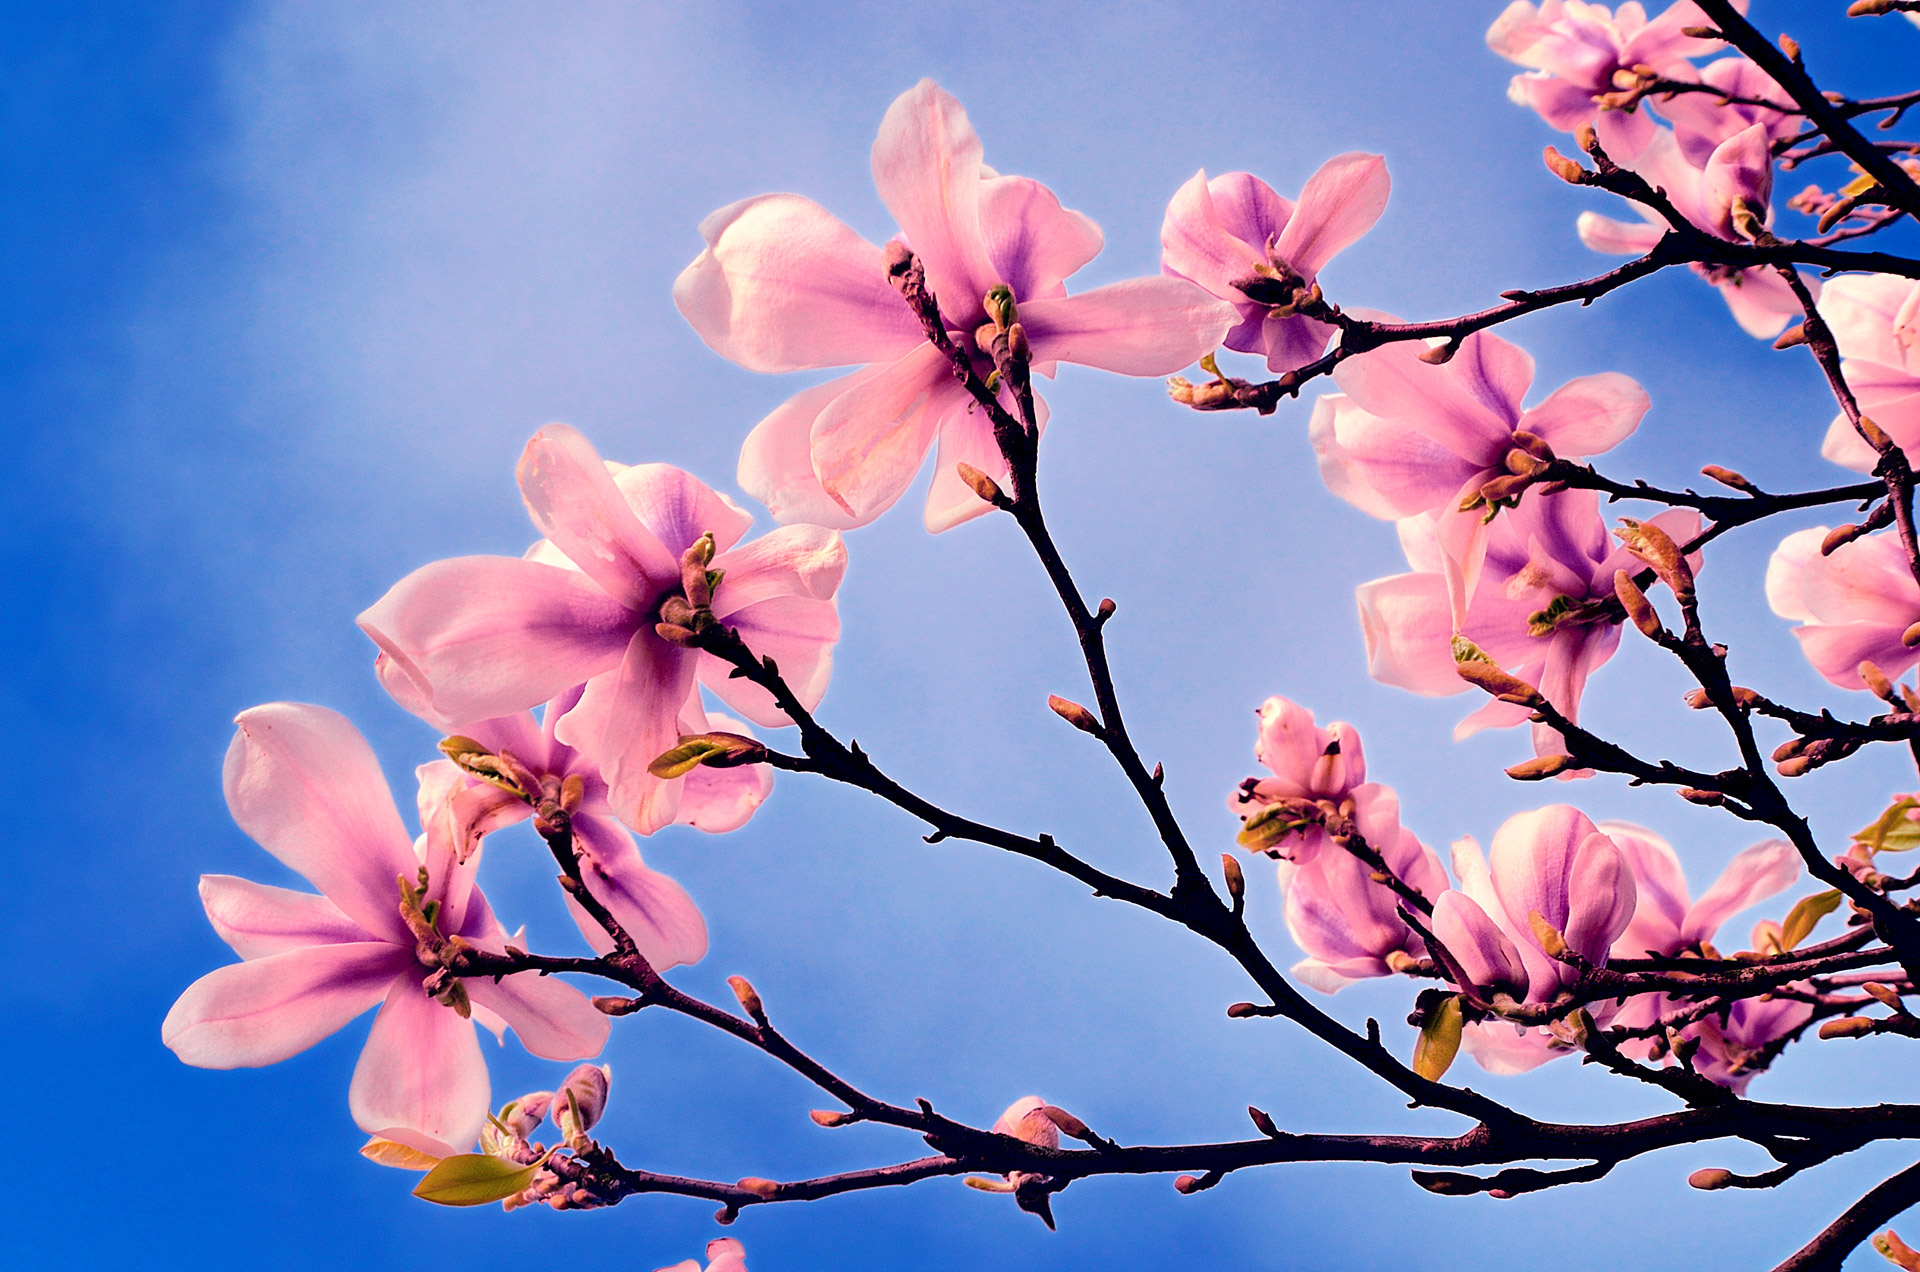 Free photo: Spring tree, Blossoms, Colorful